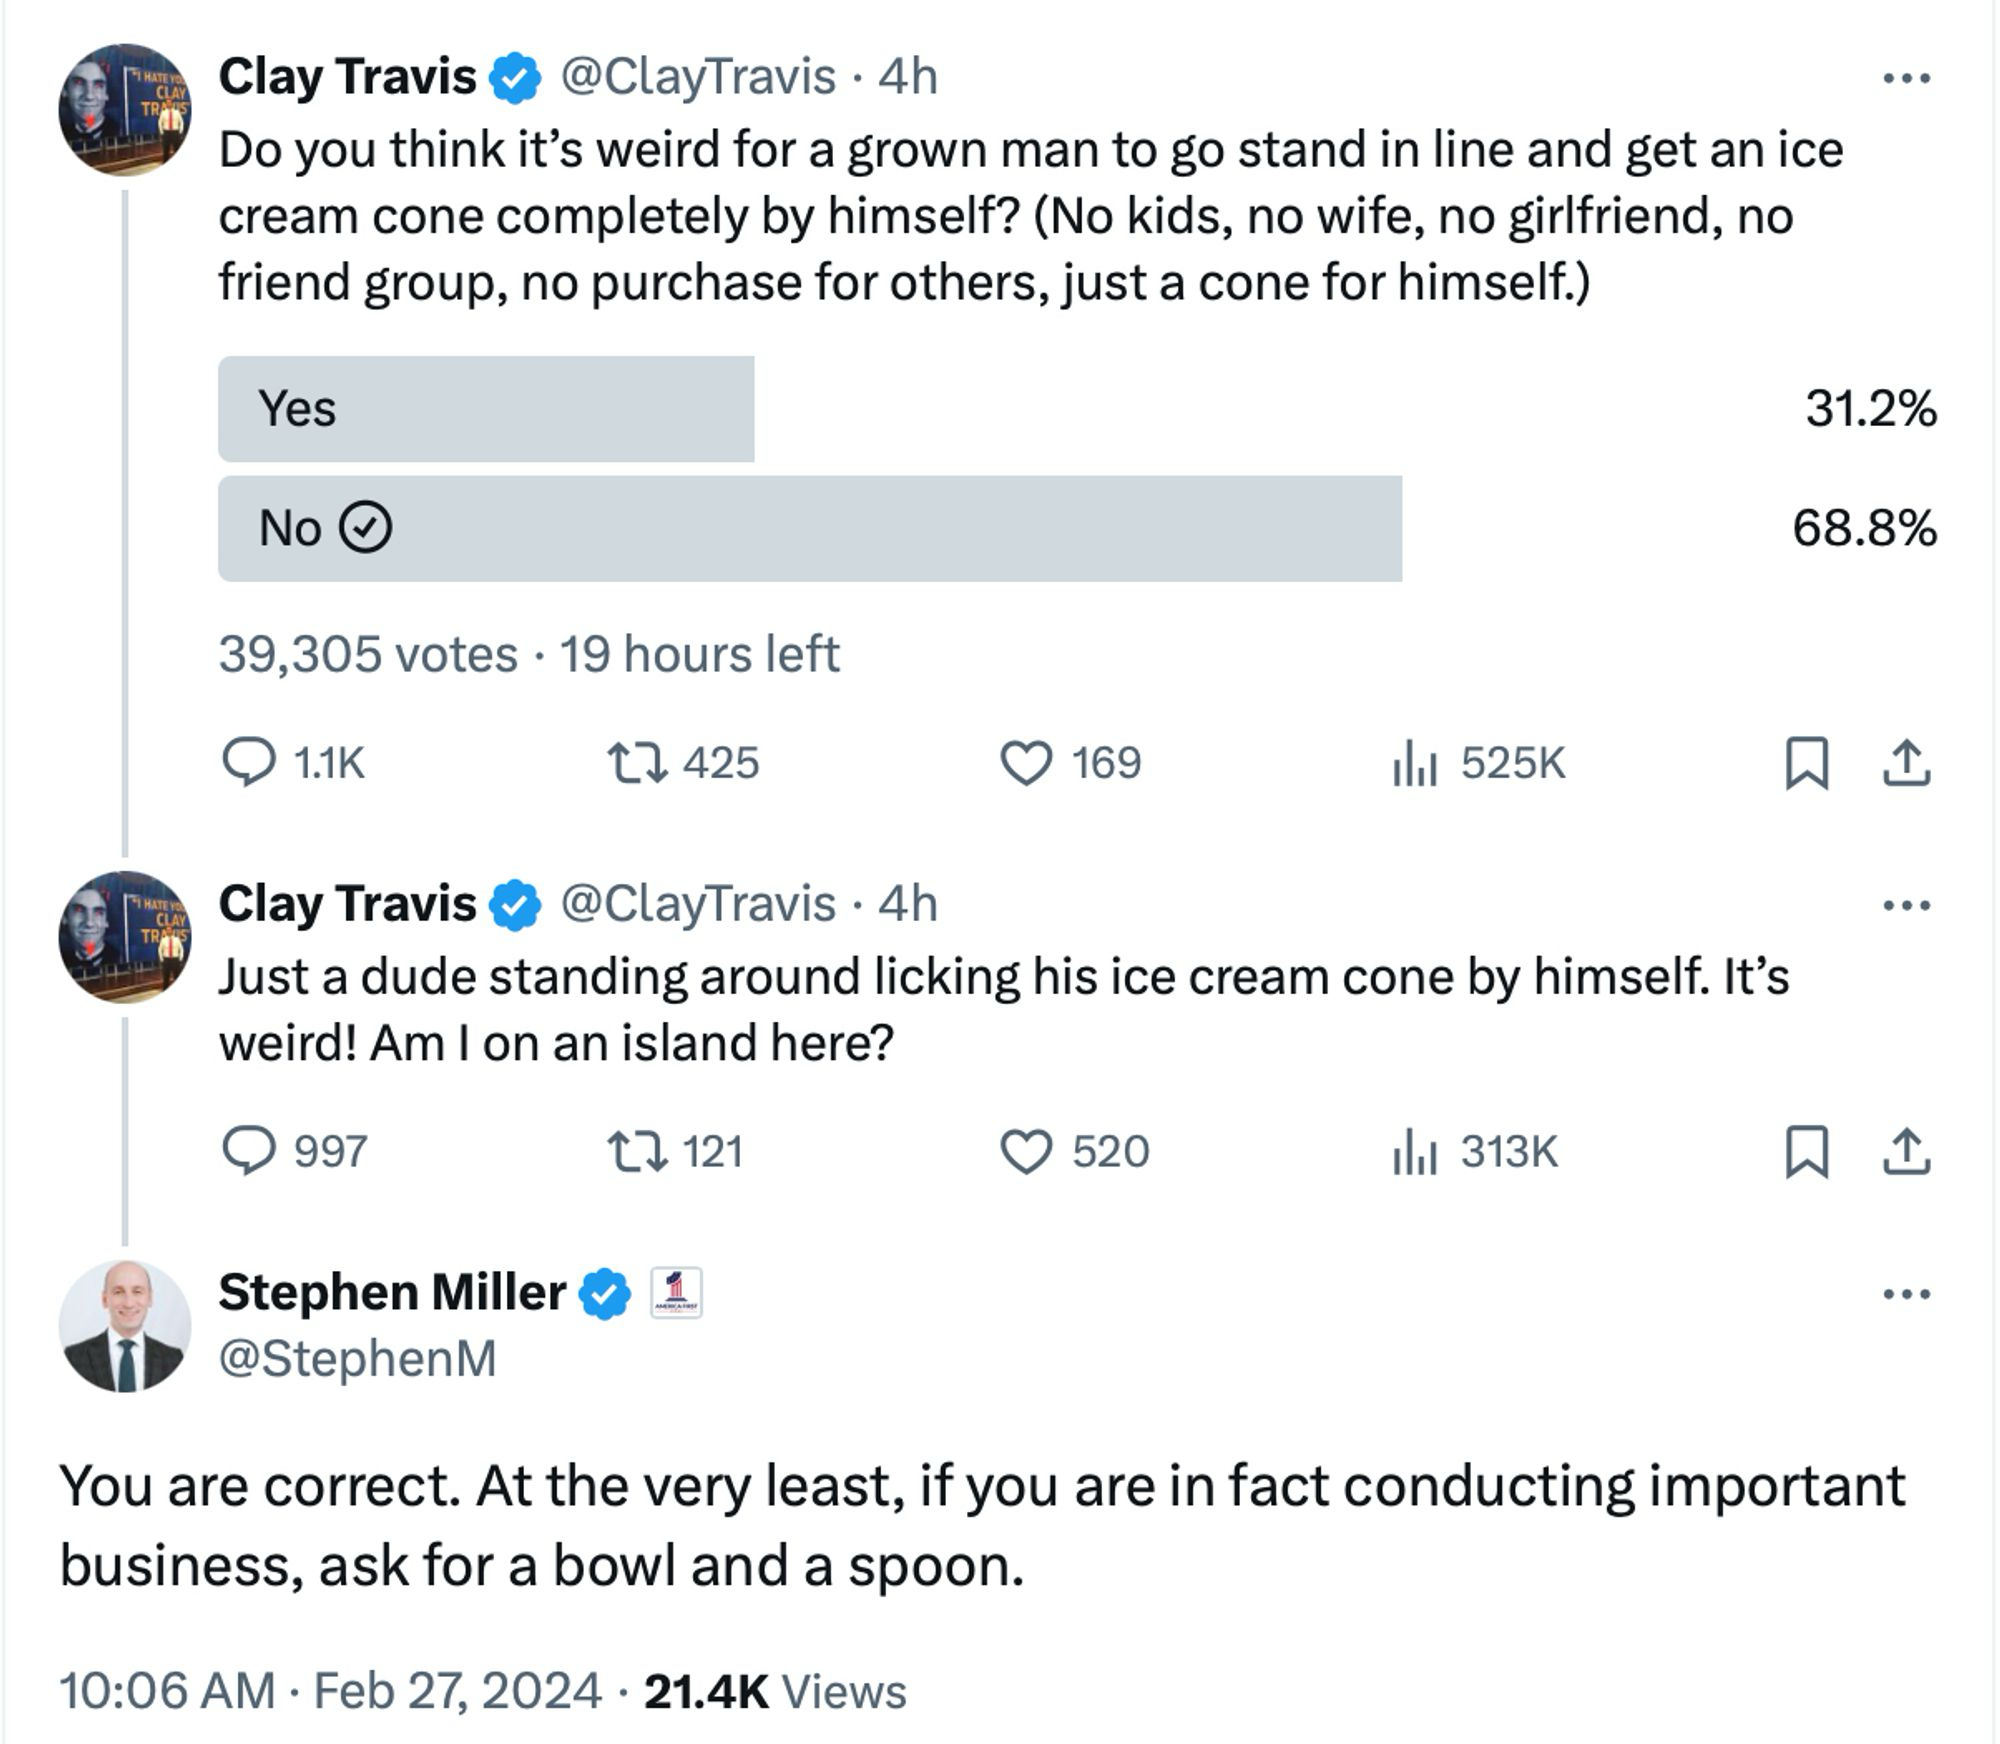 A screenshot of tweets discussing if it&rsquo;s odd for a man to eat an ice cream cone alone, showing poll results and people&rsquo;s opinions.